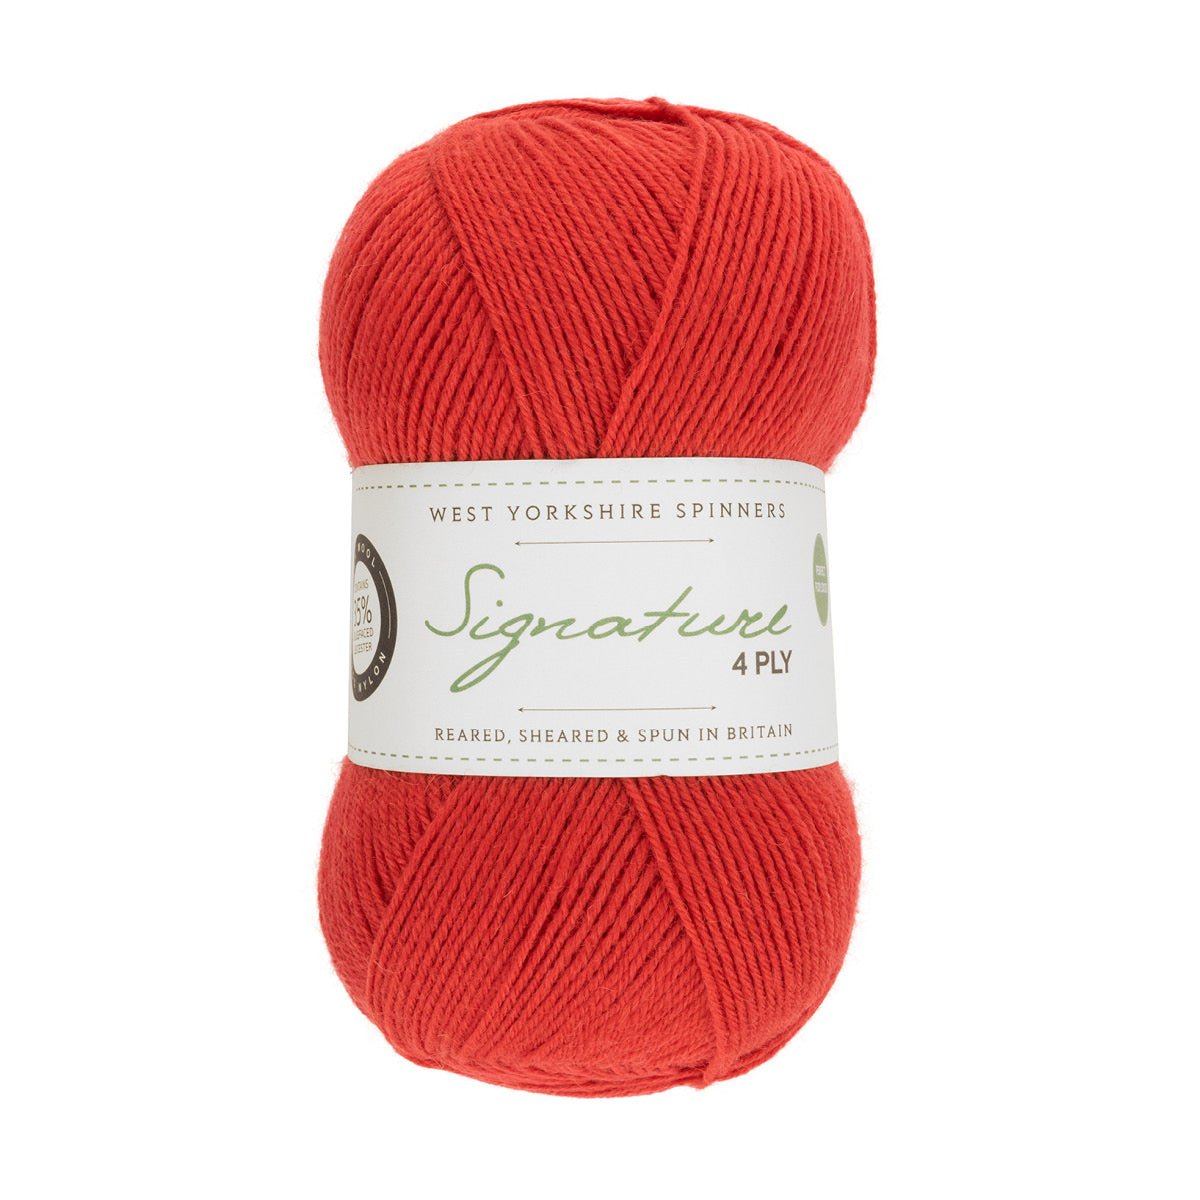 SIGNATURE 4PLY 510-Cayenne Pepper - West Yorkshire Spinners